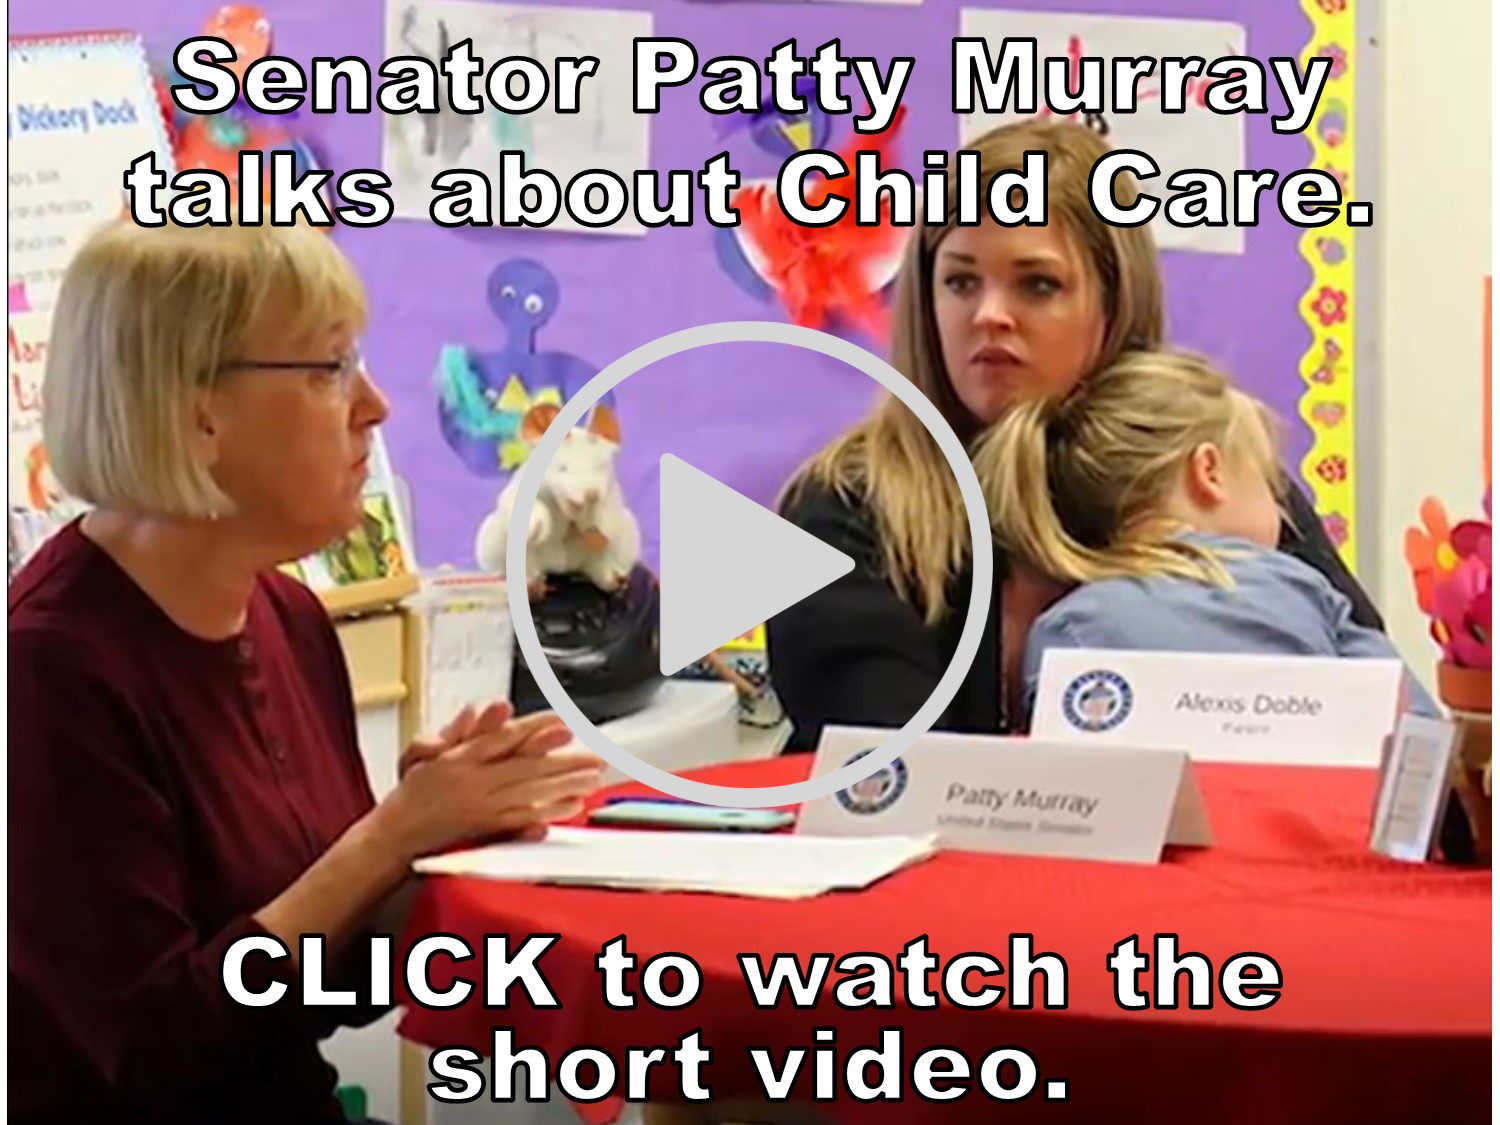 Patty Murray photo for YouTube link with text - Child Care